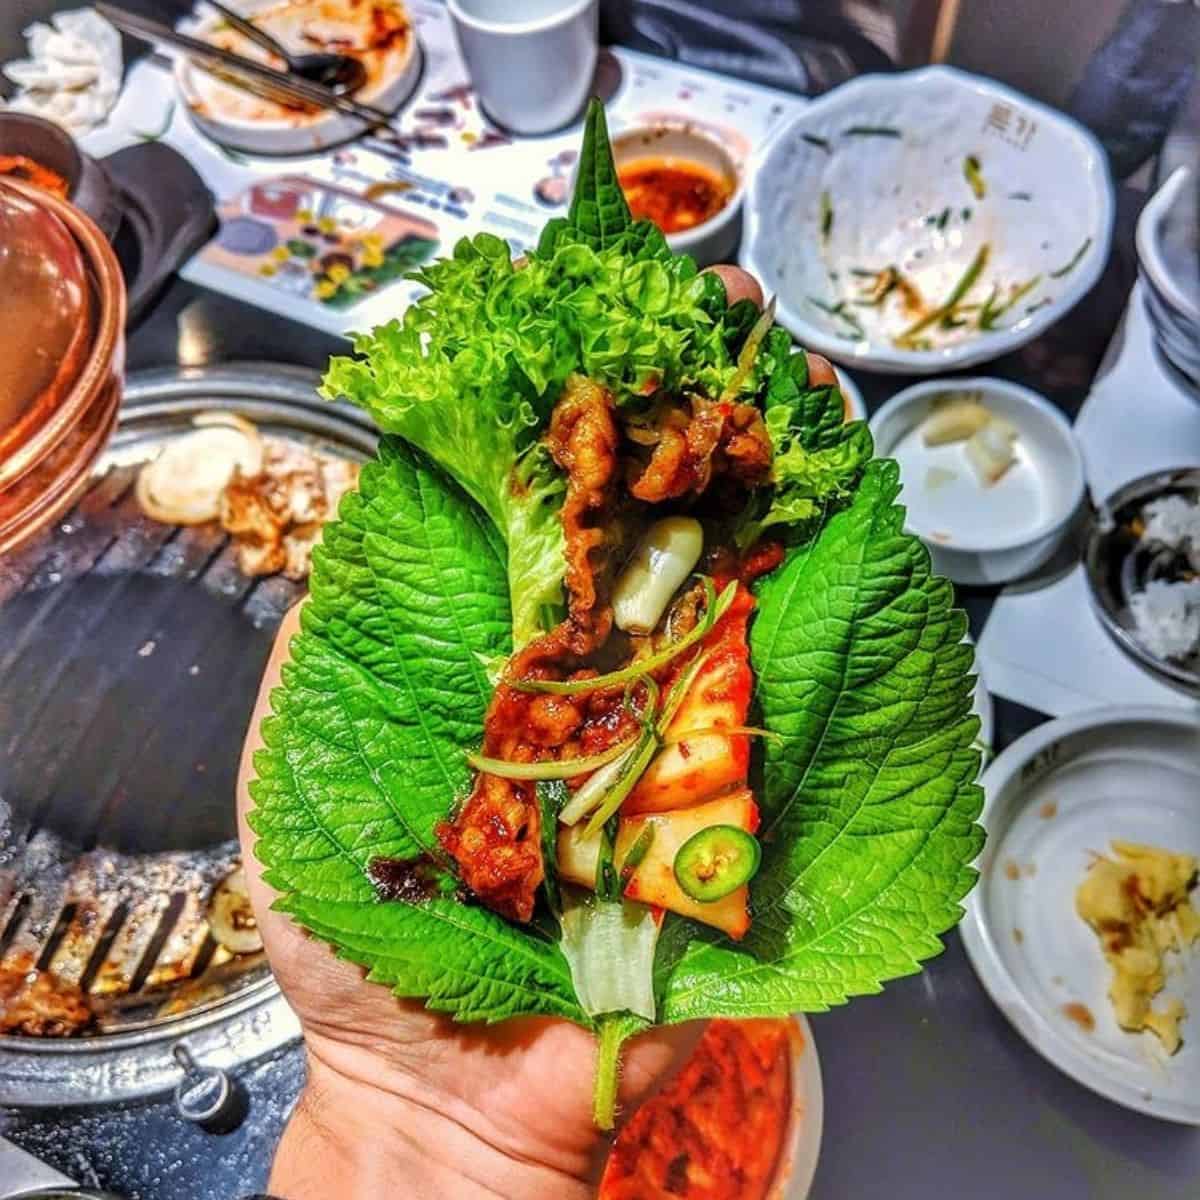 Marinated beef brisket with kimchi, lettuce and perilla leaf